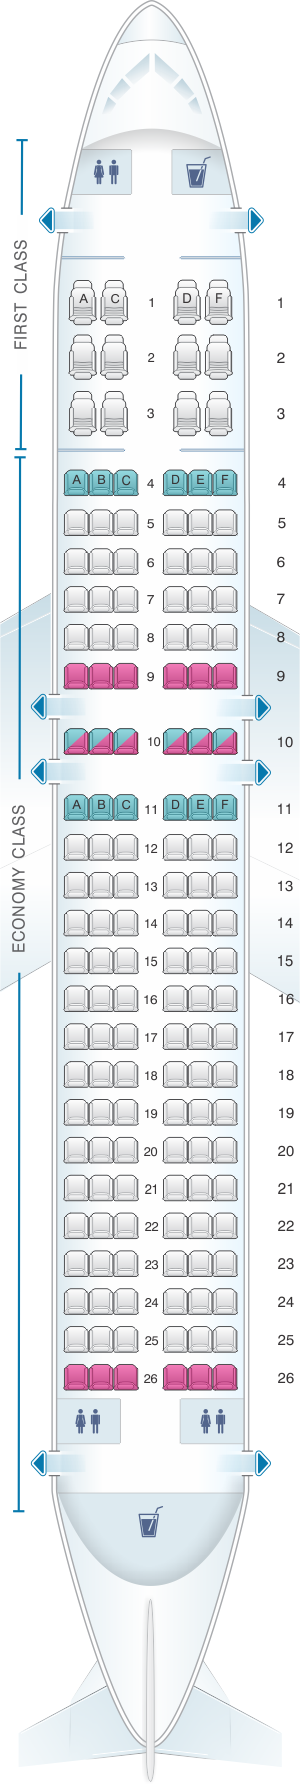 America Airbus A320 Seating Chart